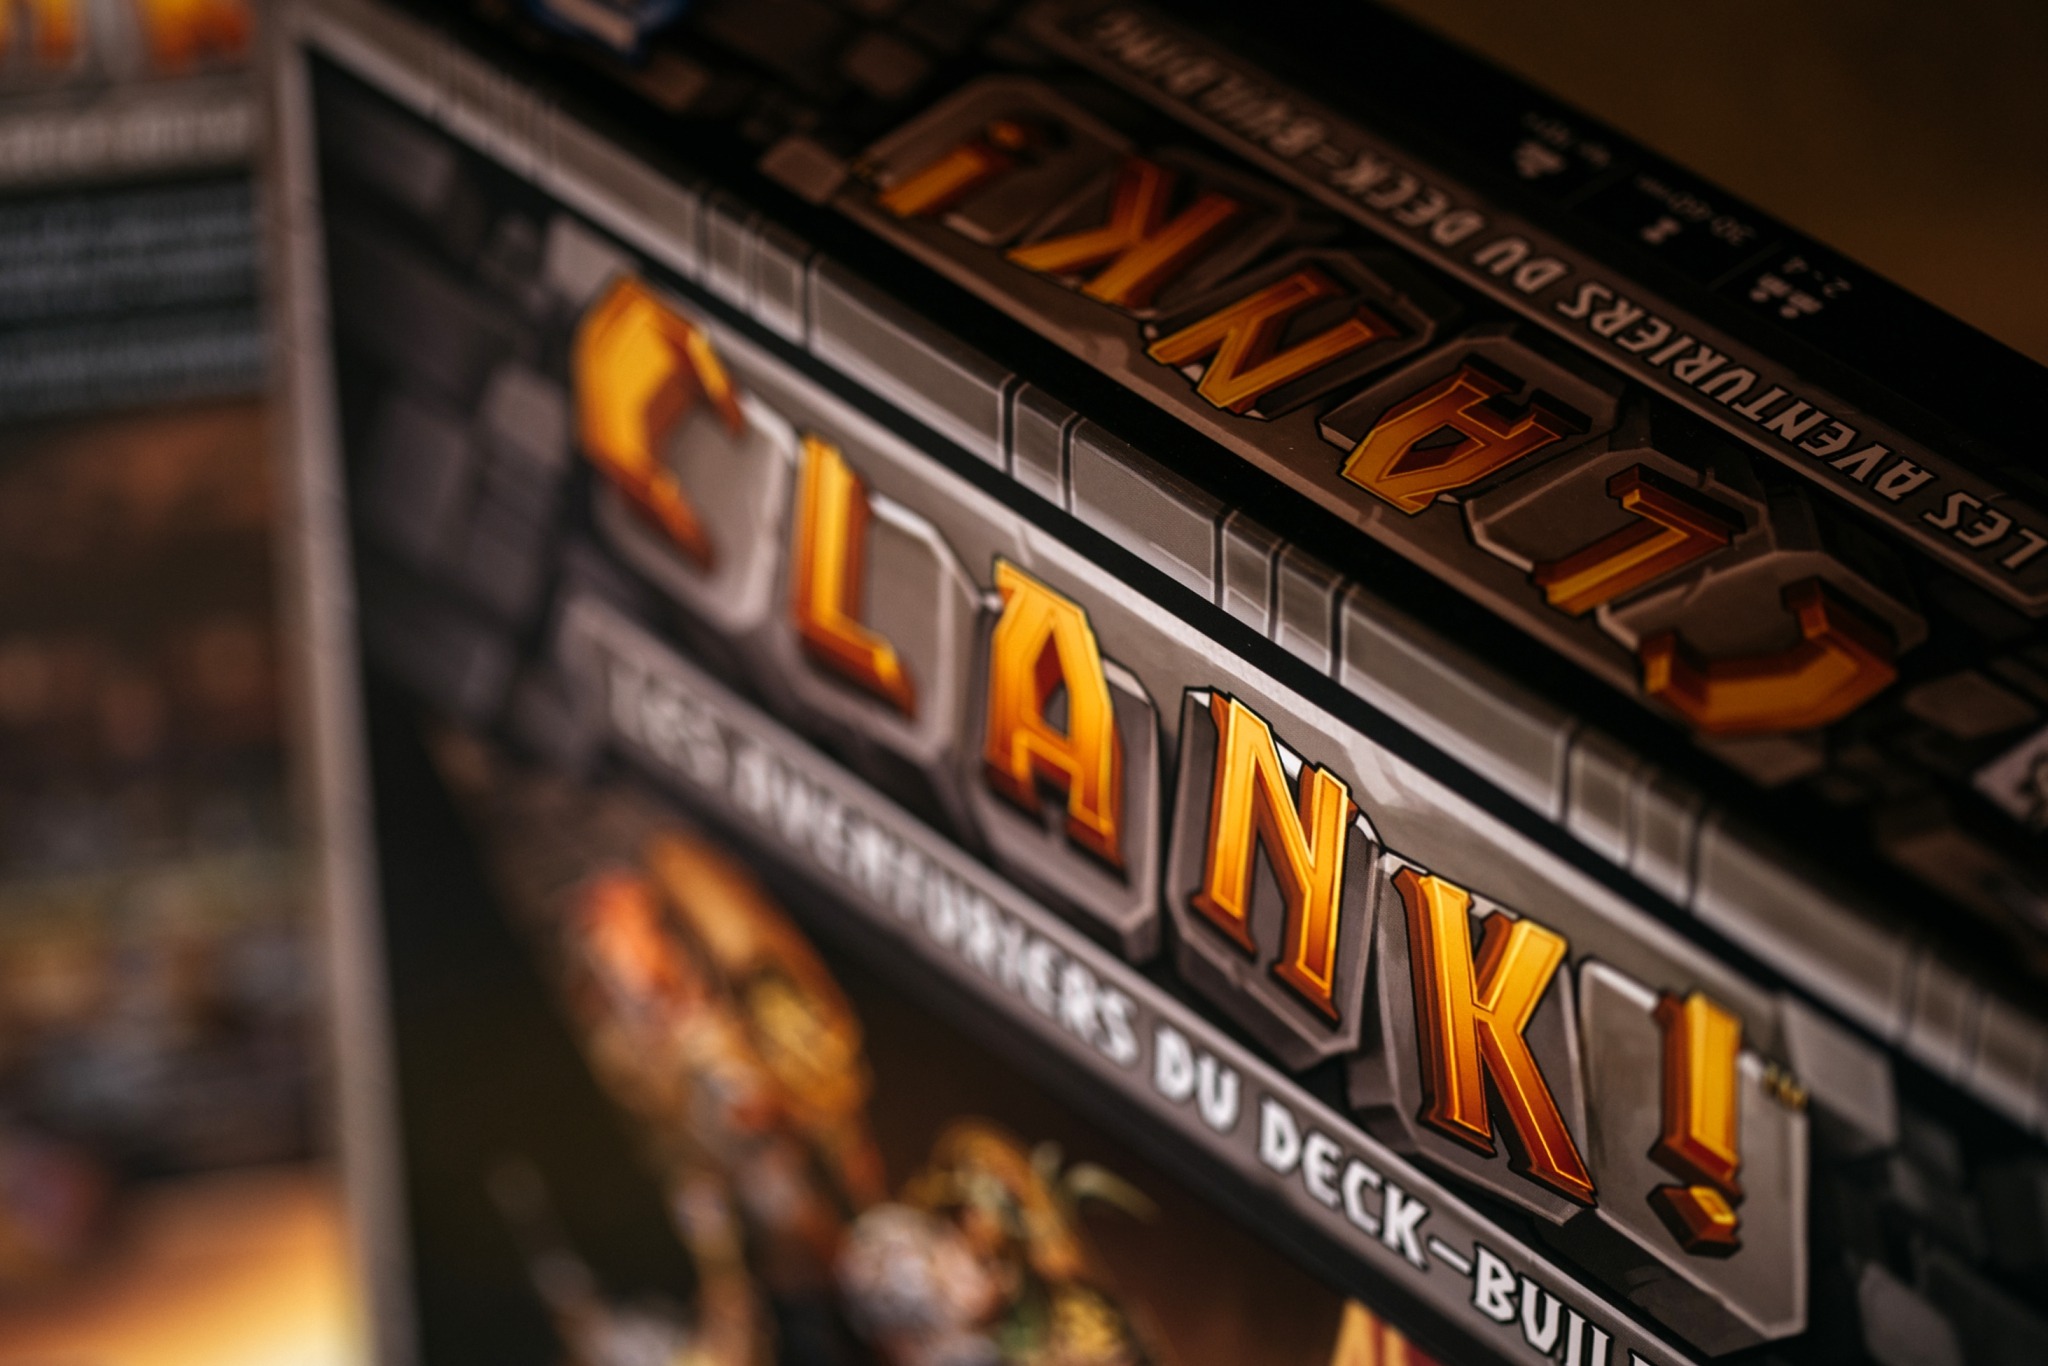 Clank ! Origames Renegade